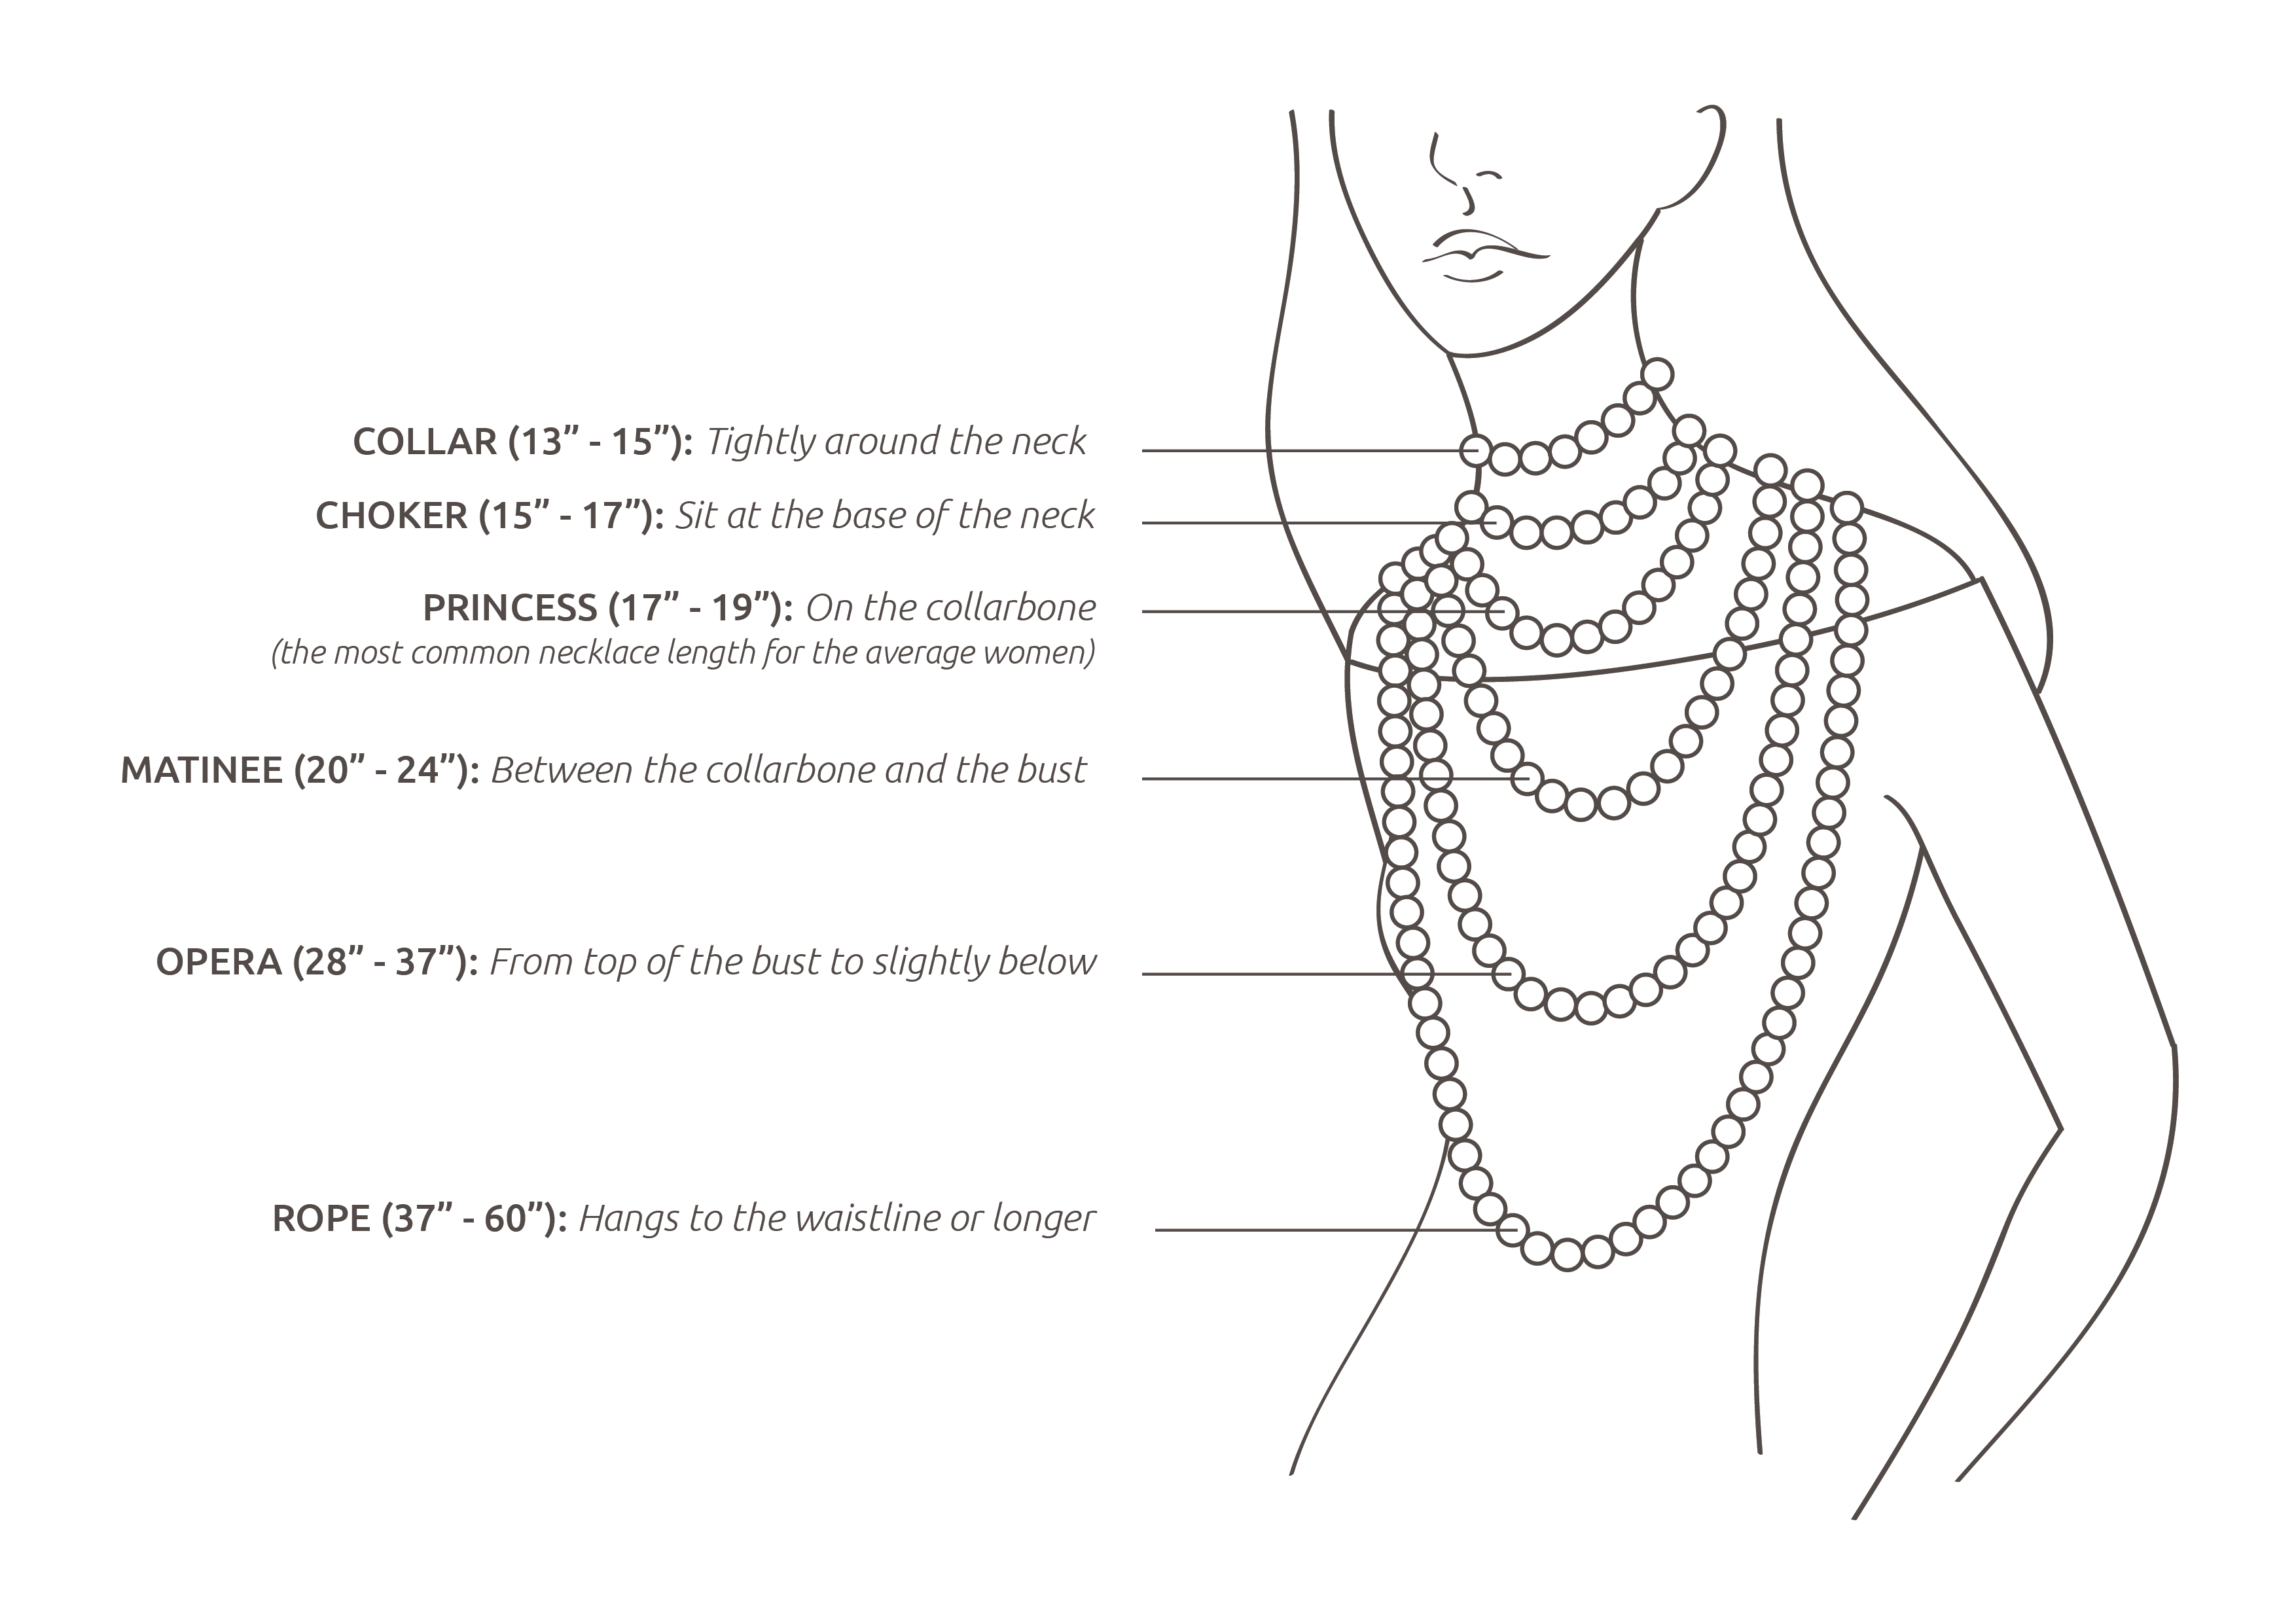 Necklace Length Guide: How To Measure & Choose The Right ...